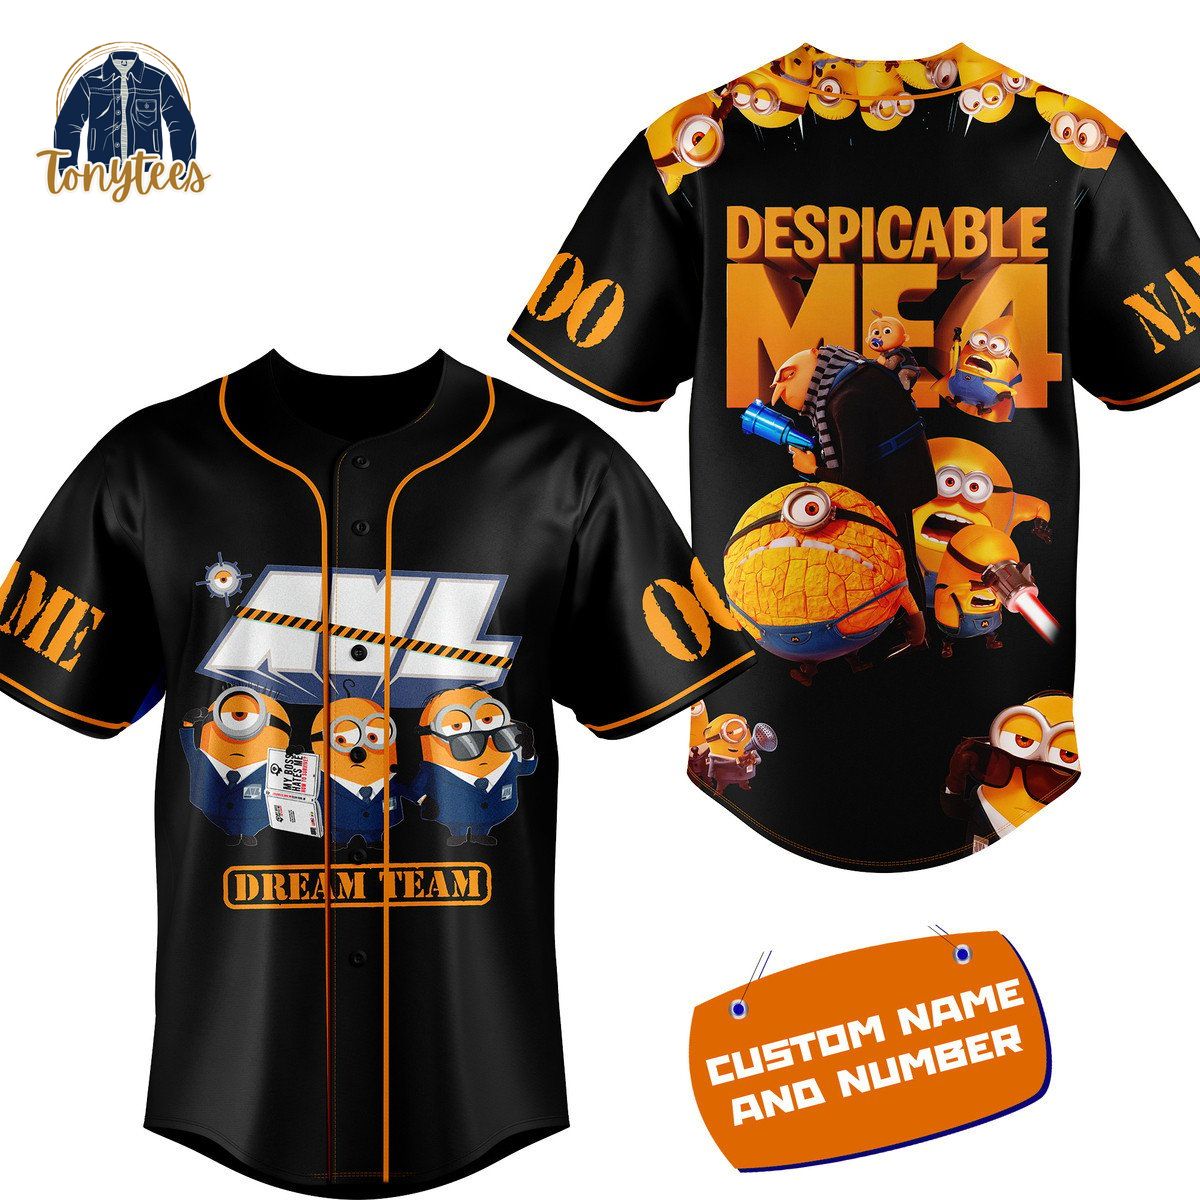 Despicable Me 4 personalized baseball jersey